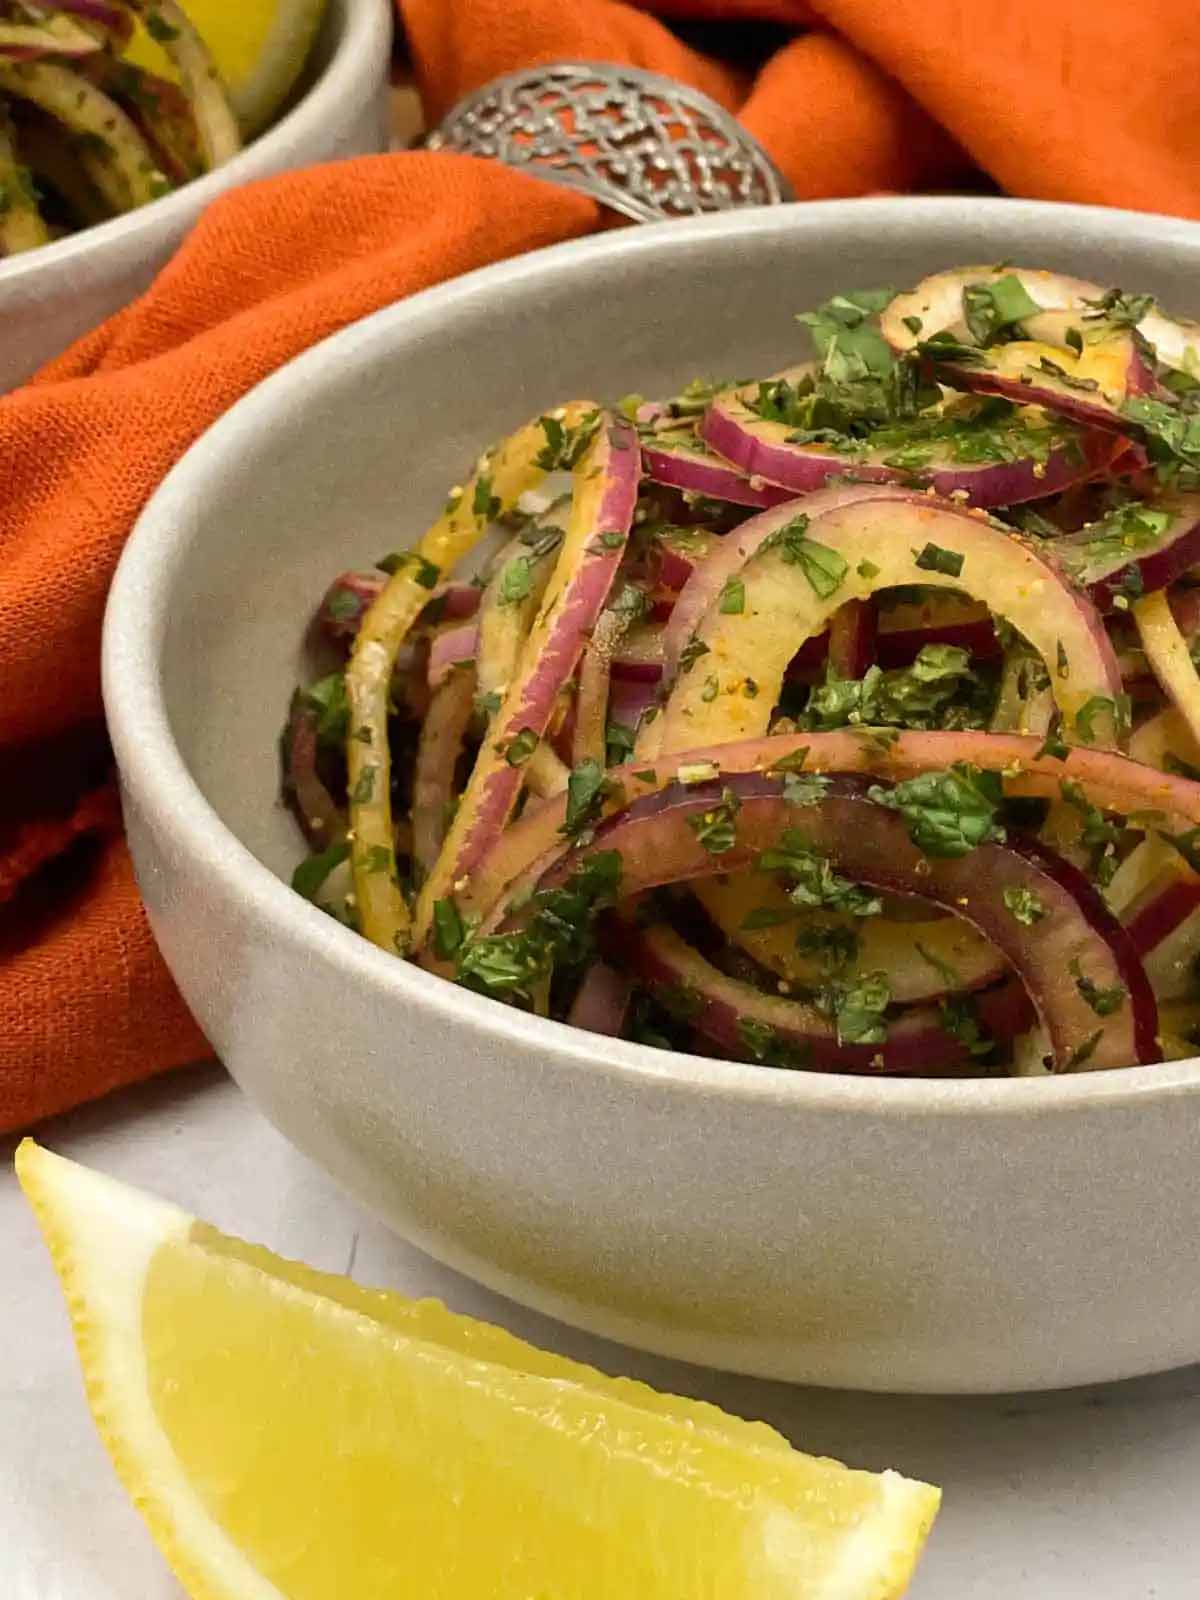 Indian onion salad recipe in a bowl with a slice of lemon.